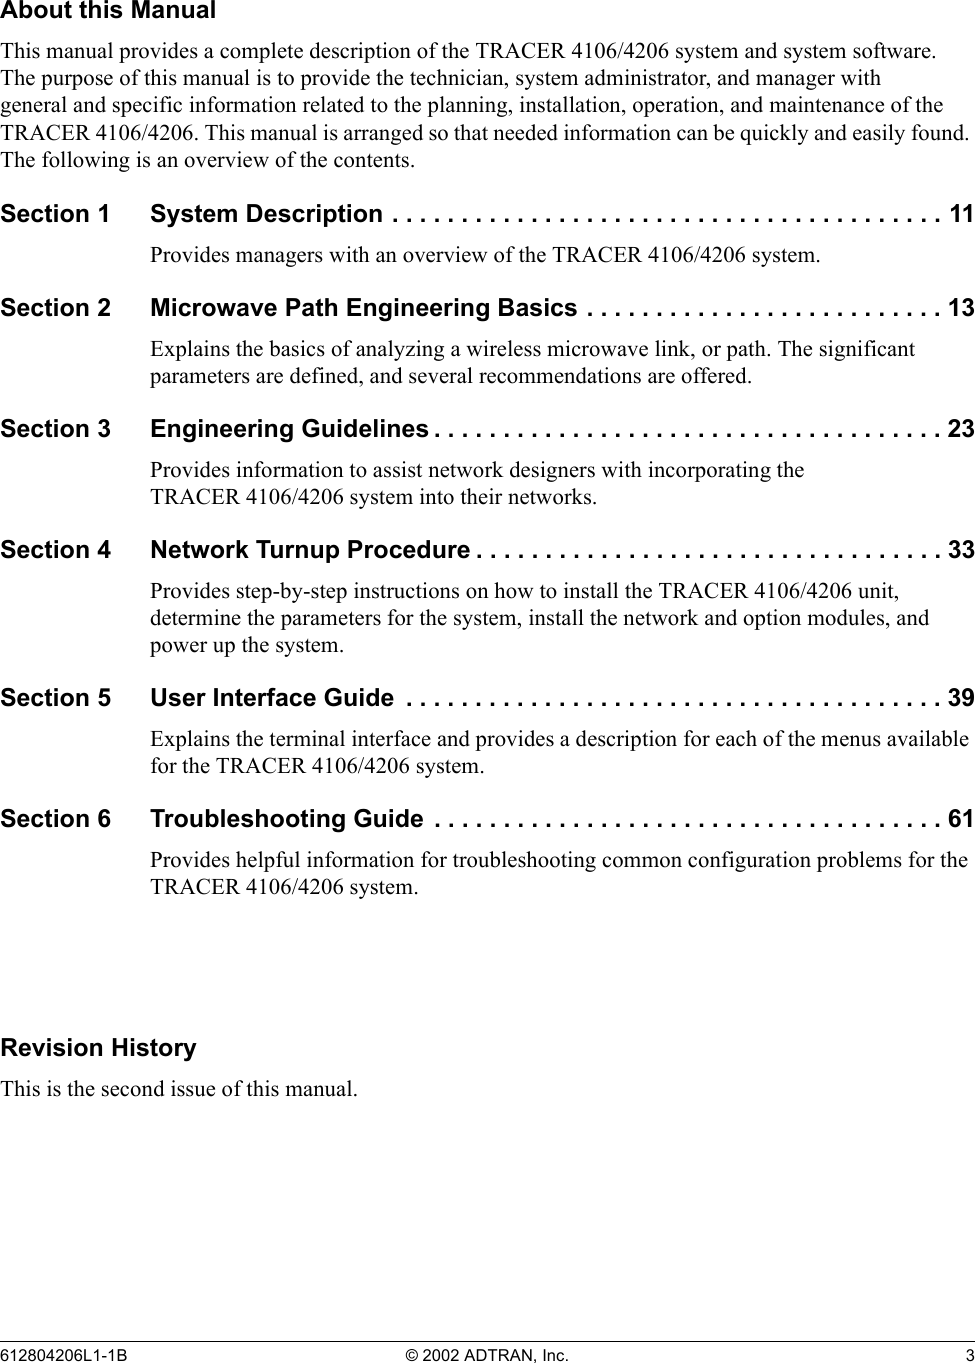 612804206L1-1B © 2002 ADTRAN, Inc. 3About this ManualThis manual provides a complete description of the TRACER 4106/4206 system and system software. The purpose of this manual is to provide the technician, system administrator, and manager with general and specific information related to the planning, installation, operation, and maintenance of the TRACER 4106/4206. This manual is arranged so that needed information can be quickly and easily found. The following is an overview of the contents.Section 1 System Description . . . . . . . . . . . . . . . . . . . . . . . . . . . . . . . . . . . . . . . . 11Provides managers with an overview of the TRACER 4106/4206 system.Section 2 Microwave Path Engineering Basics . . . . . . . . . . . . . . . . . . . . . . . . . . 13Explains the basics of analyzing a wireless microwave link, or path. The significant parameters are defined, and several recommendations are offered.Section 3 Engineering Guidelines . . . . . . . . . . . . . . . . . . . . . . . . . . . . . . . . . . . . . 23Provides information to assist network designers with incorporating the TRACER 4106/4206 system into their networks.Section 4 Network Turnup Procedure . . . . . . . . . . . . . . . . . . . . . . . . . . . . . . . . . . 33Provides step-by-step instructions on how to install the TRACER 4106/4206 unit, determine the parameters for the system, install the network and option modules, and power up the system.Section 5 User Interface Guide  . . . . . . . . . . . . . . . . . . . . . . . . . . . . . . . . . . . . . . . 39Explains the terminal interface and provides a description for each of the menus available for the TRACER 4106/4206 system.Section 6 Troubleshooting Guide . . . . . . . . . . . . . . . . . . . . . . . . . . . . . . . . . . . . . 61Provides helpful information for troubleshooting common configuration problems for the TRACER 4106/4206 system.Revision HistoryThis is the second issue of this manual.